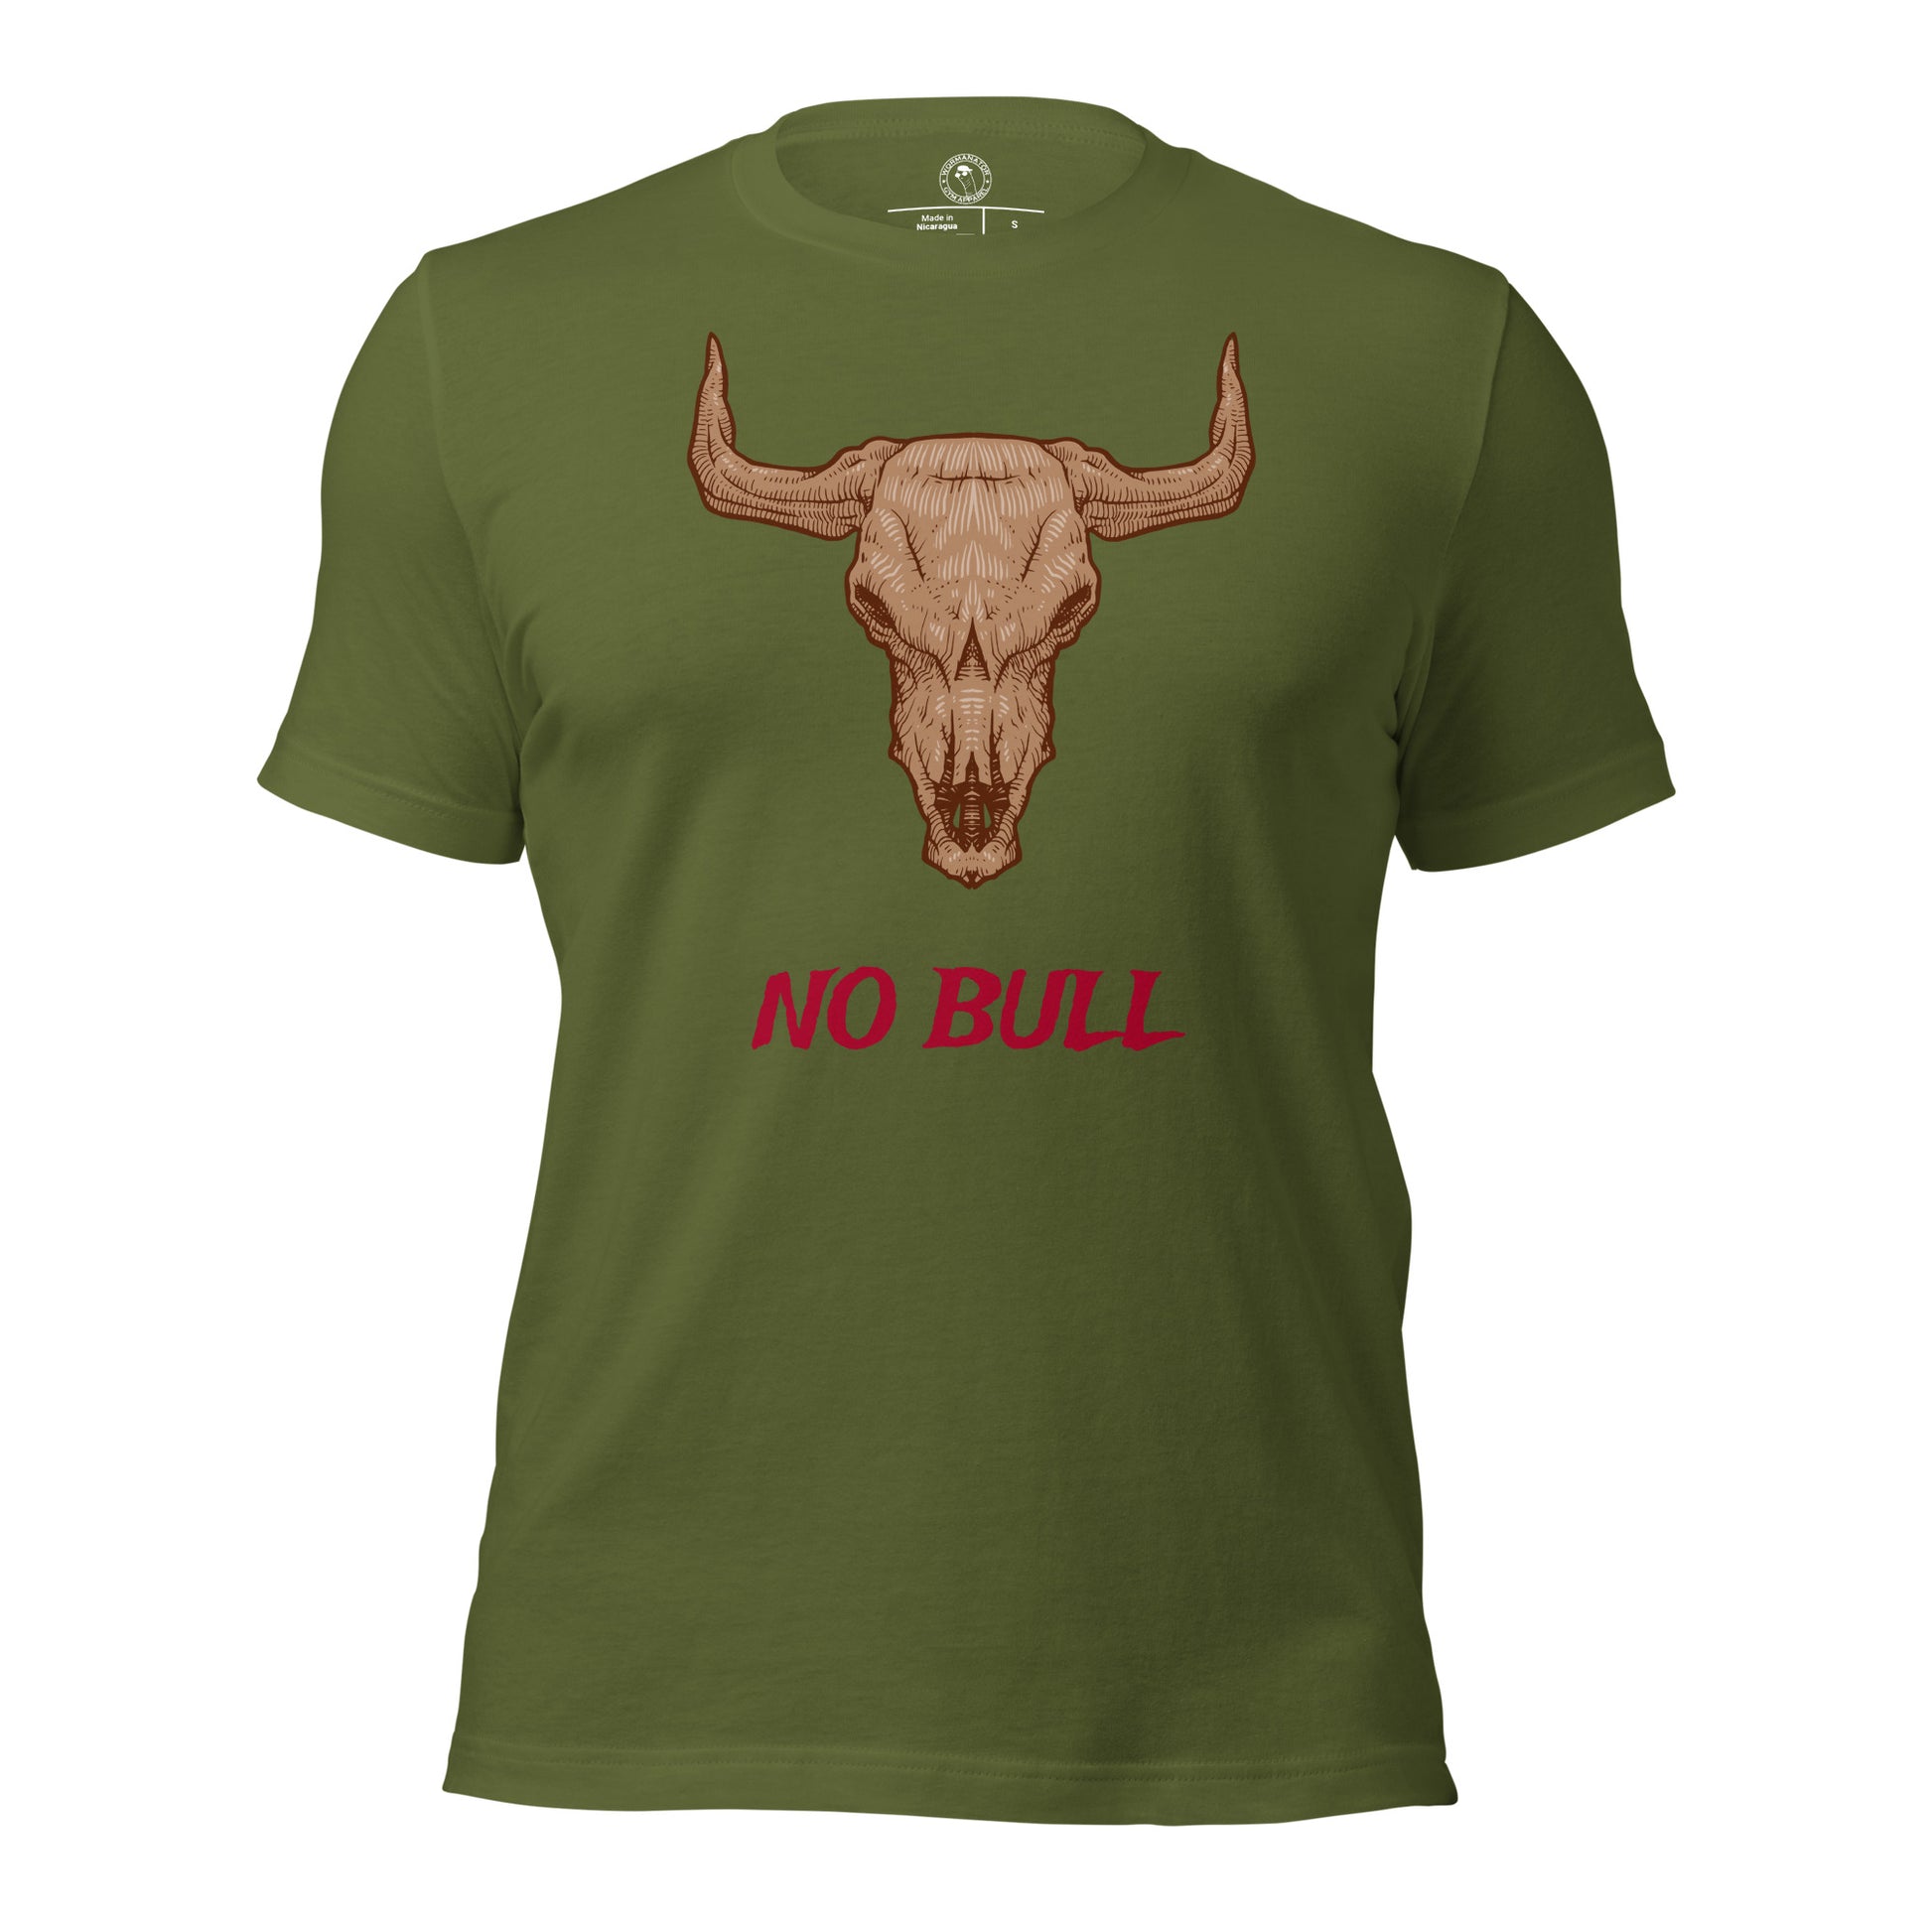 No Bull Shirt in Olive Green